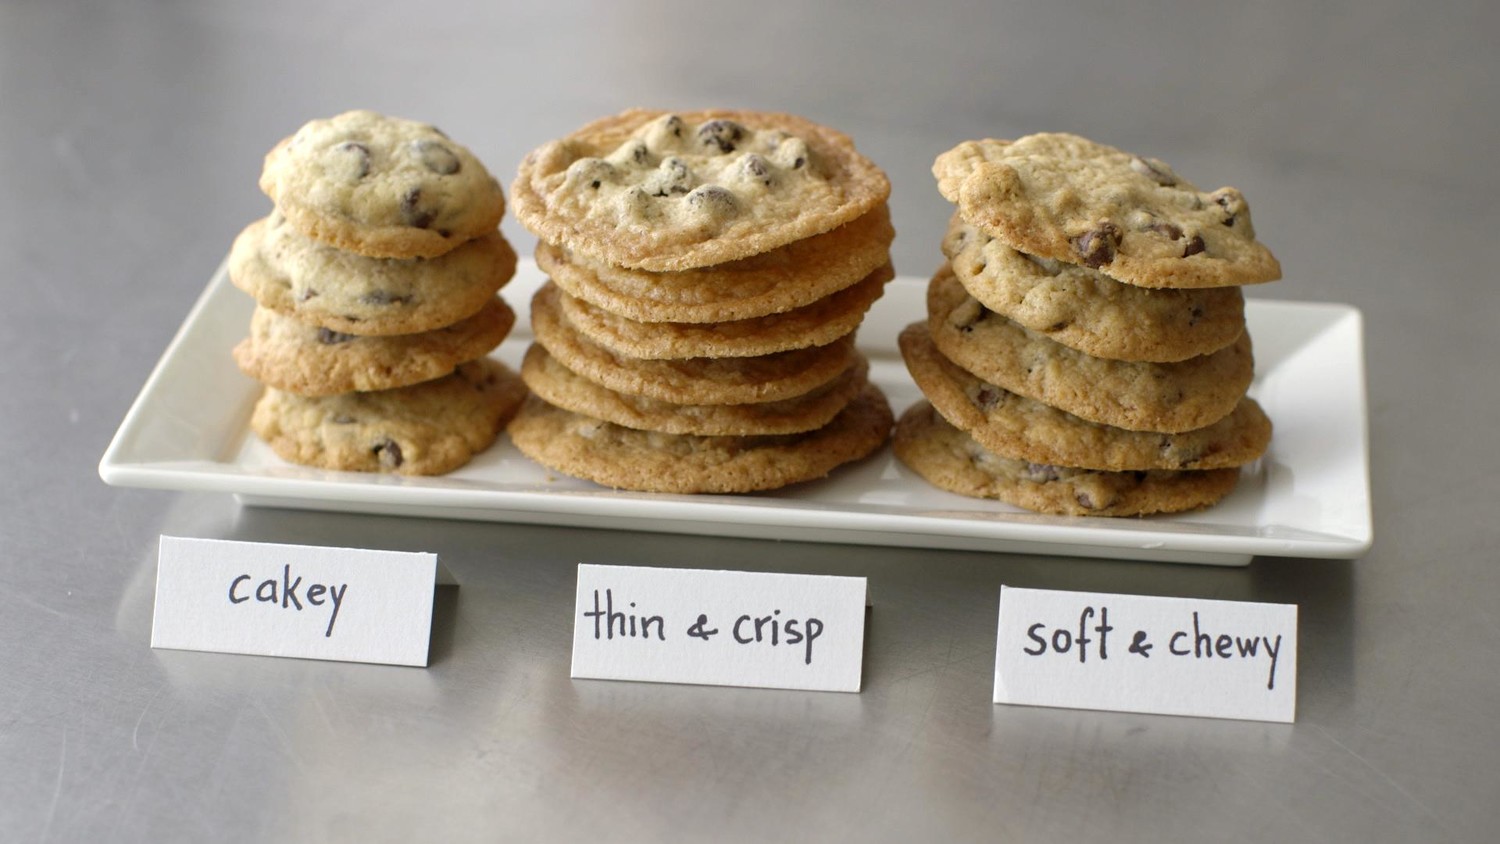 Cookie Chart